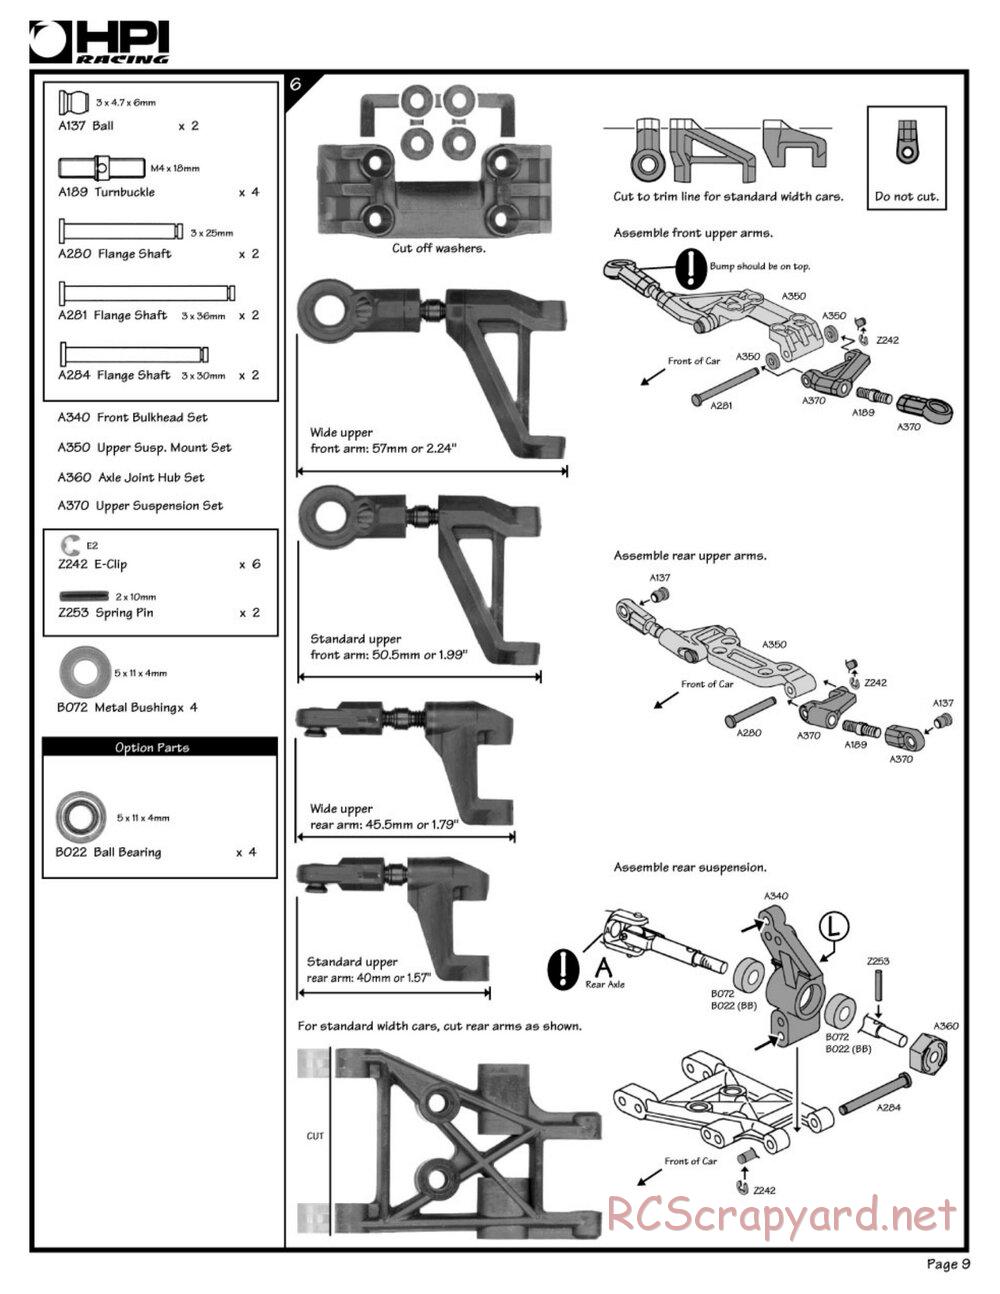 HPI - RS4 - Manual - Page 9